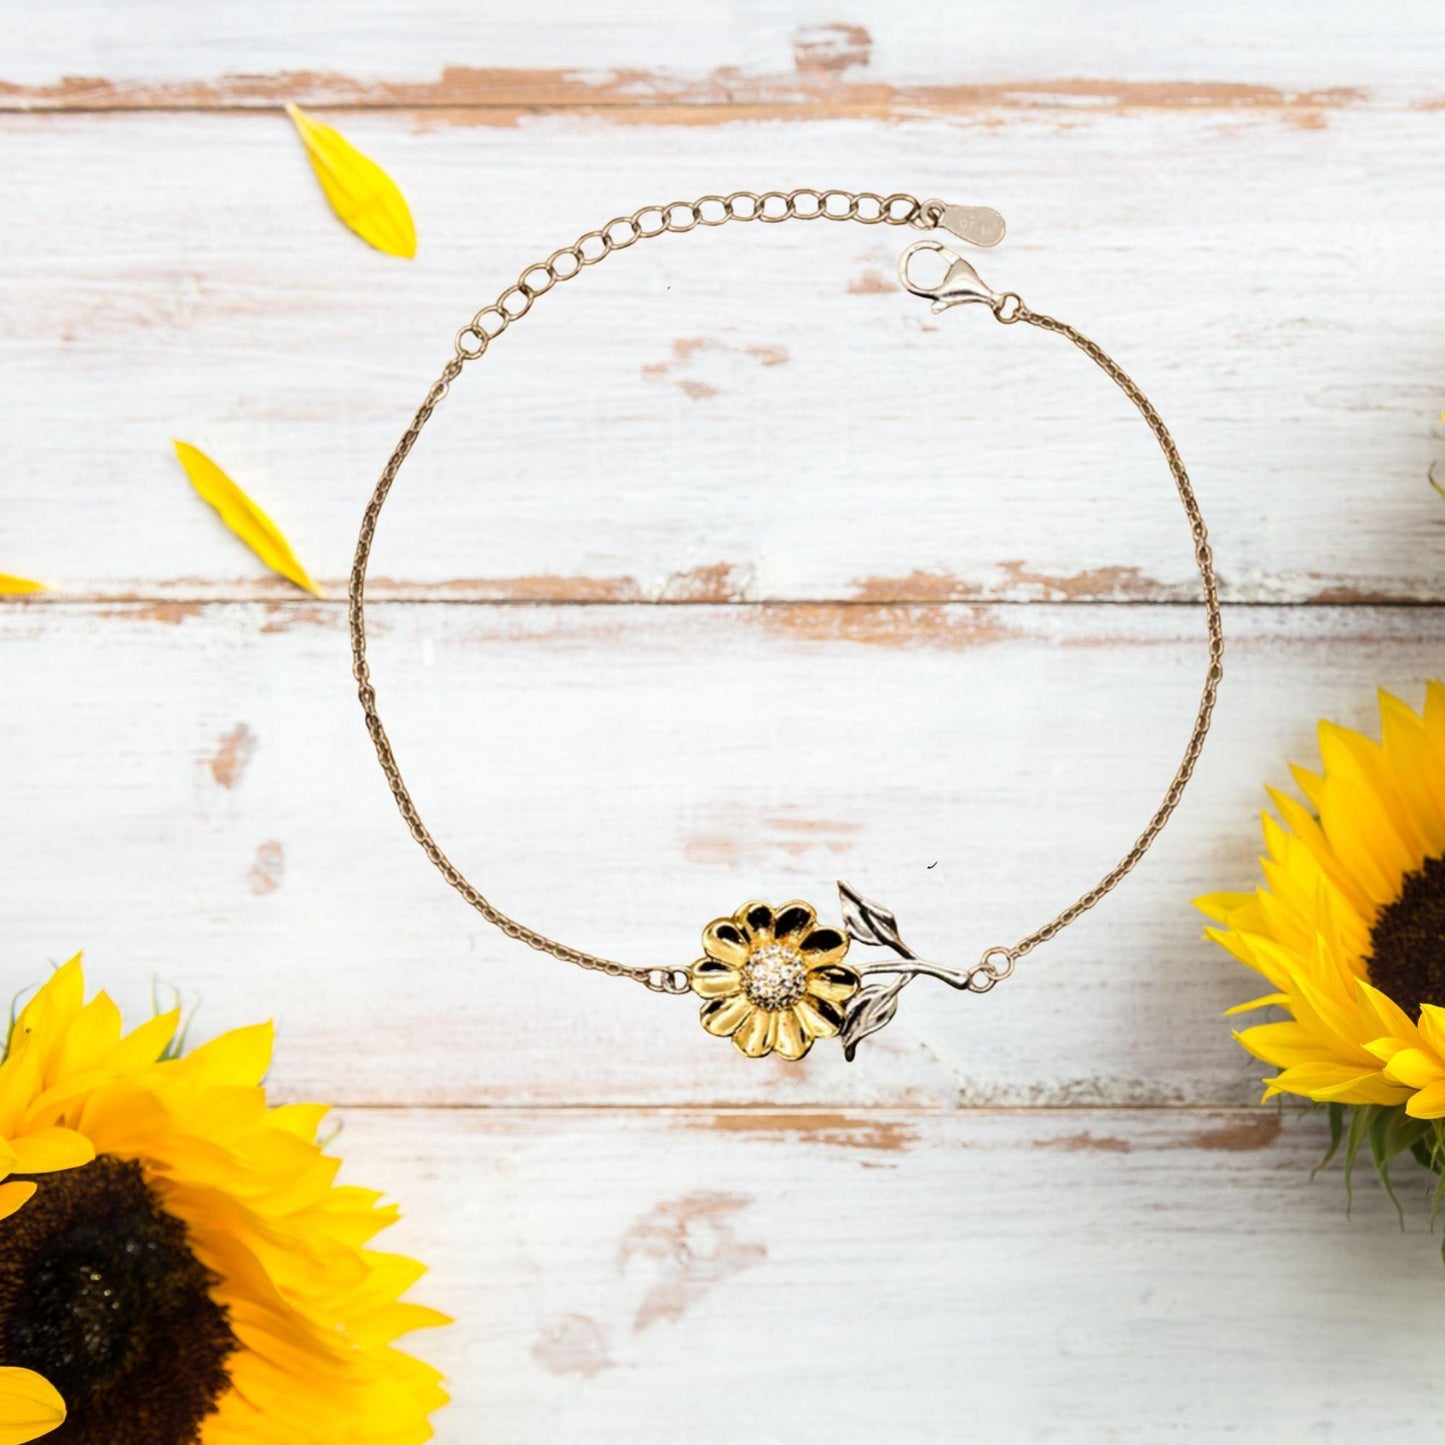 Remarkable Paraprofessional Gifts, Your dedication and hard work, Inspirational Birthday Christmas Unique Sunflower Bracelet For Paraprofessional, Coworkers, Men, Women, Friends - Mallard Moon Gift Shop